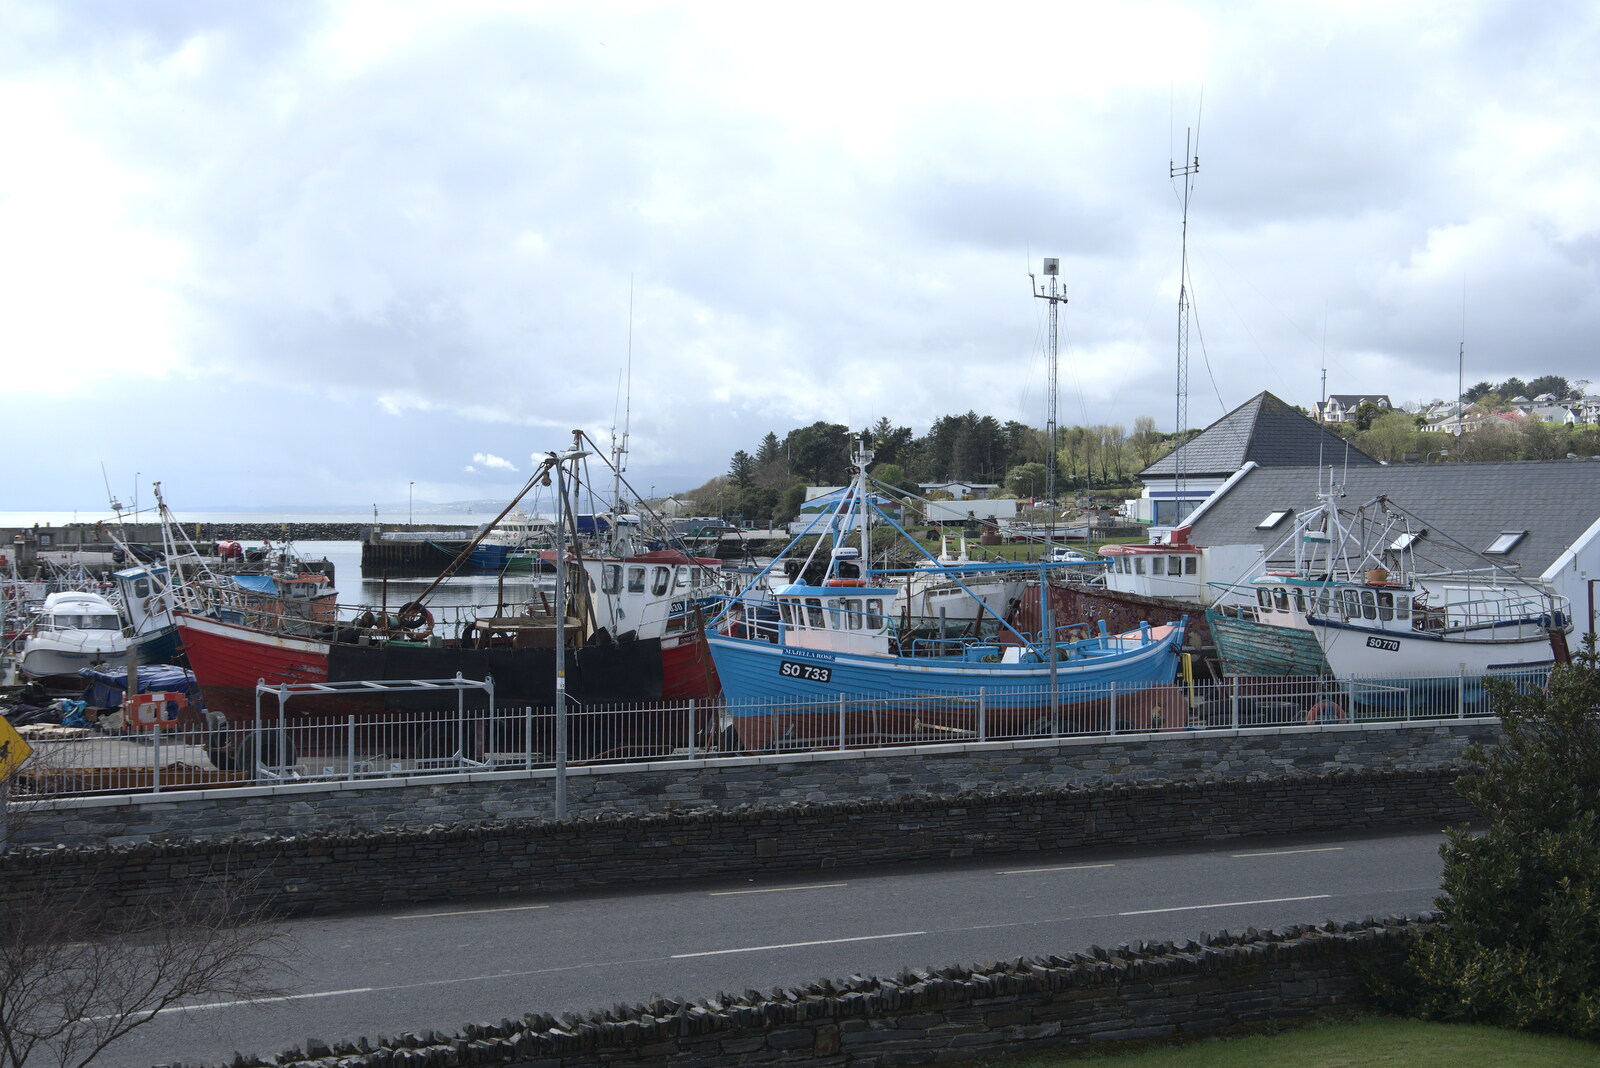 Greencastle, Doagh and Malin Head, County Donegal, Ireland - 19th April 2022: The fishing marina at Greencastle